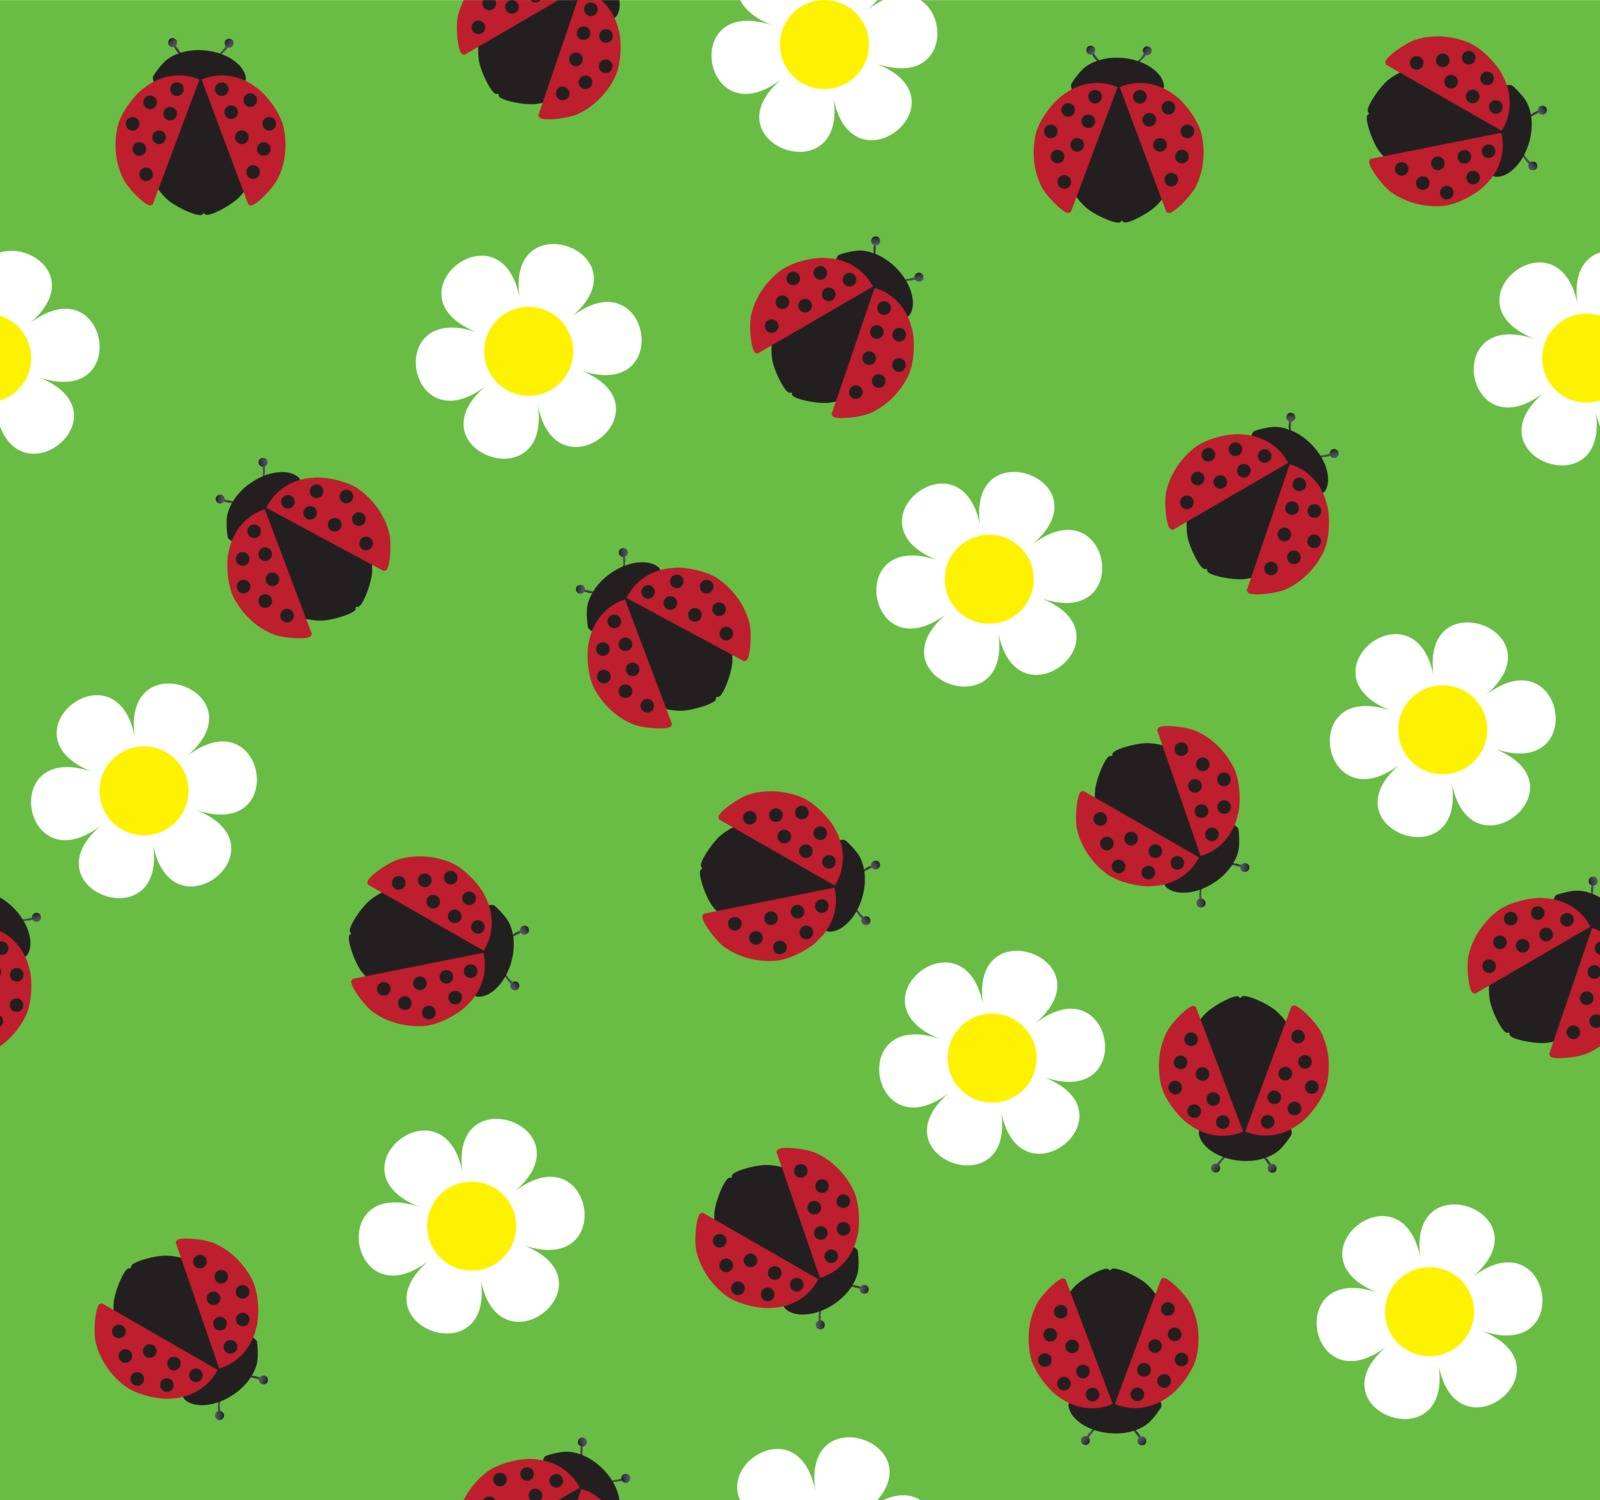 vector illustration of seamless background with ladybugs